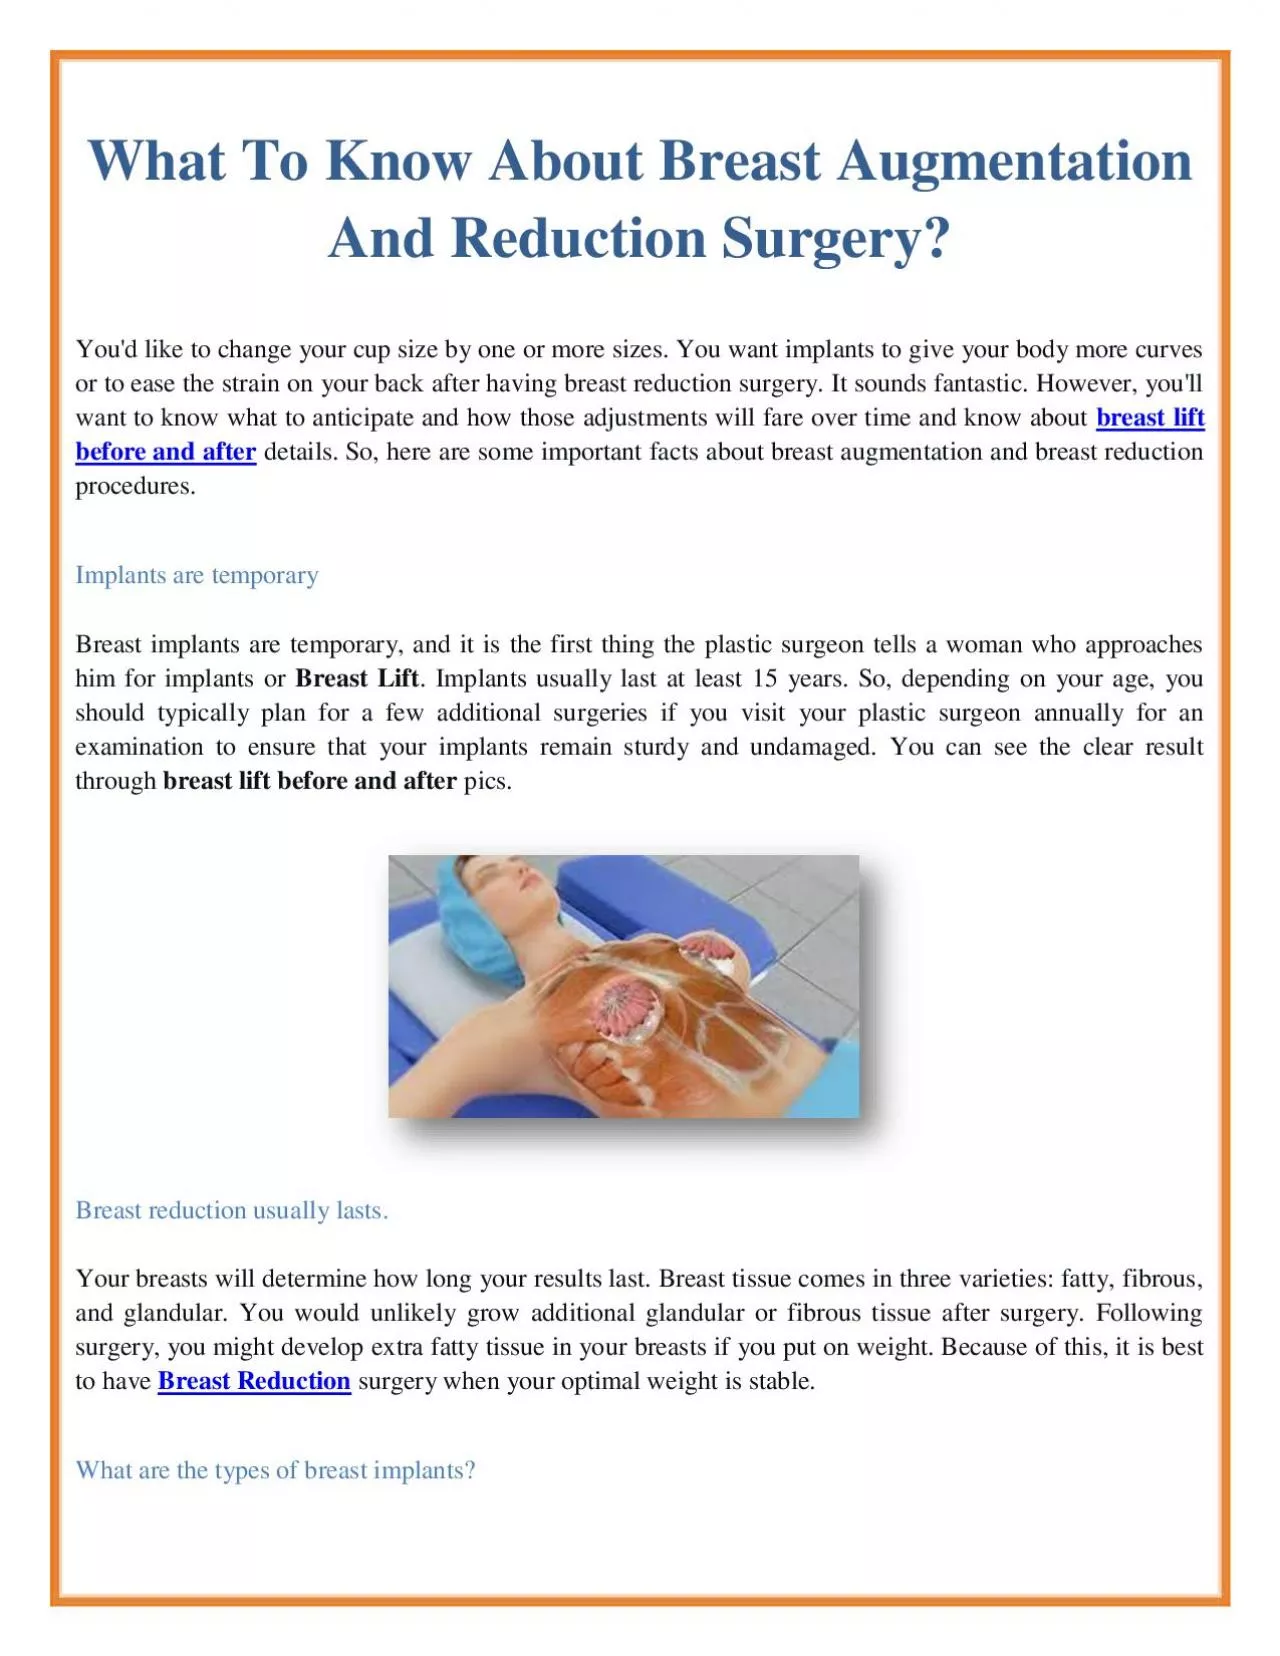 What To Know About Breast Augmentation And Reduction Surgery?